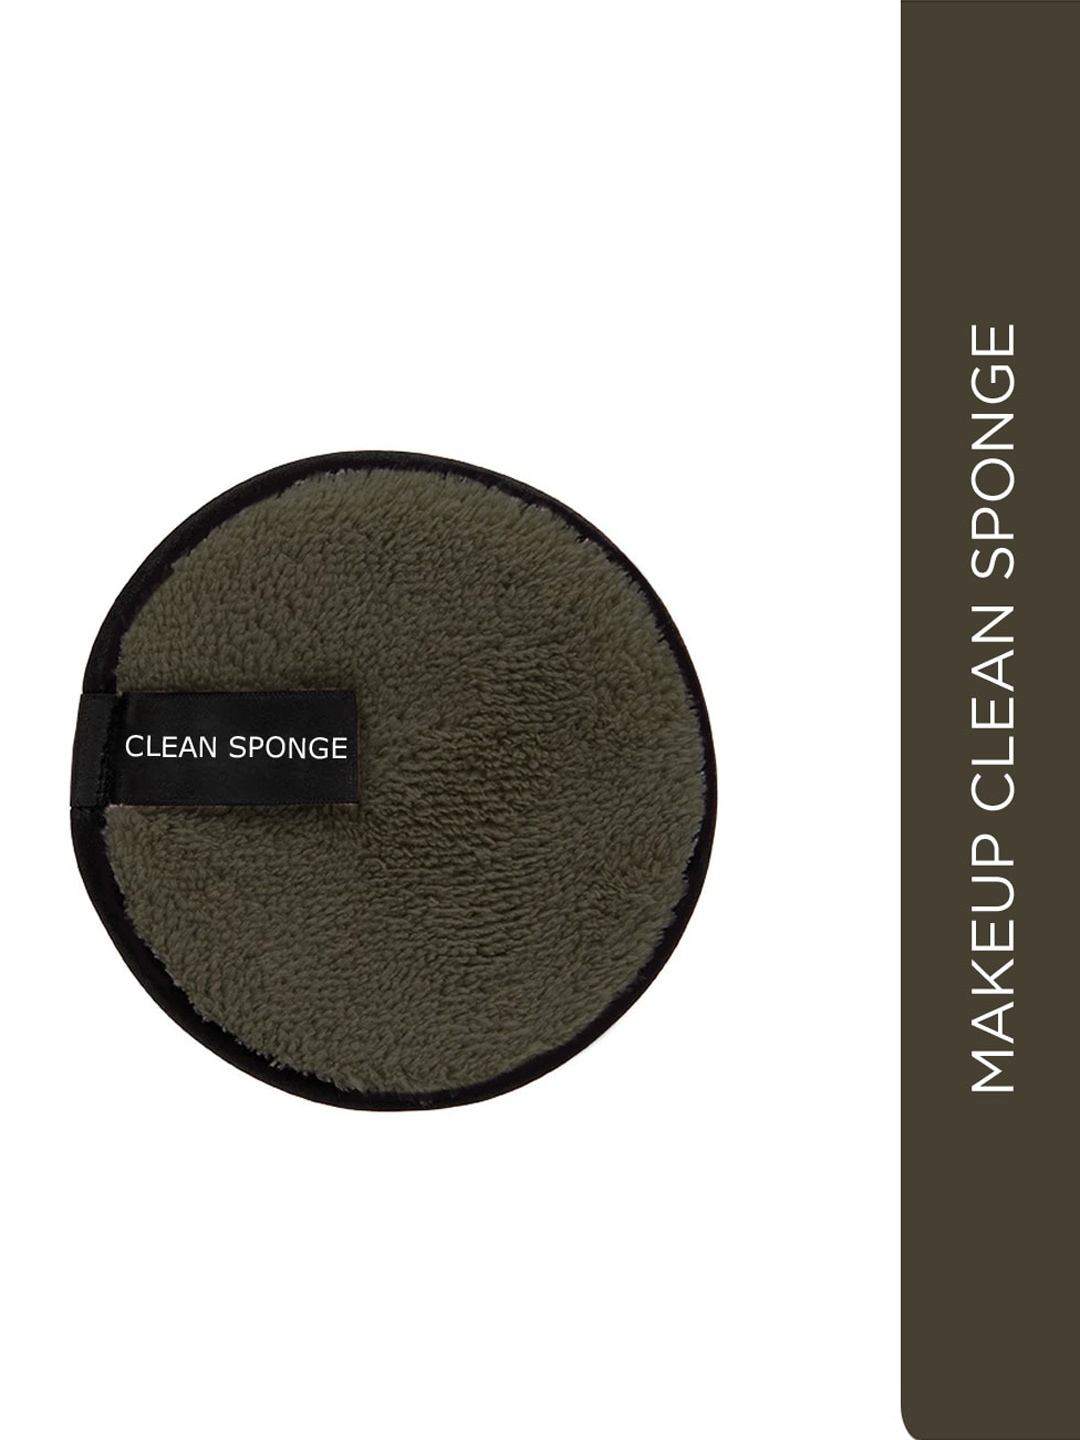 

Seven Seas Soft & Gentle Cleansing Reusable Makeup Remover Pad - Green